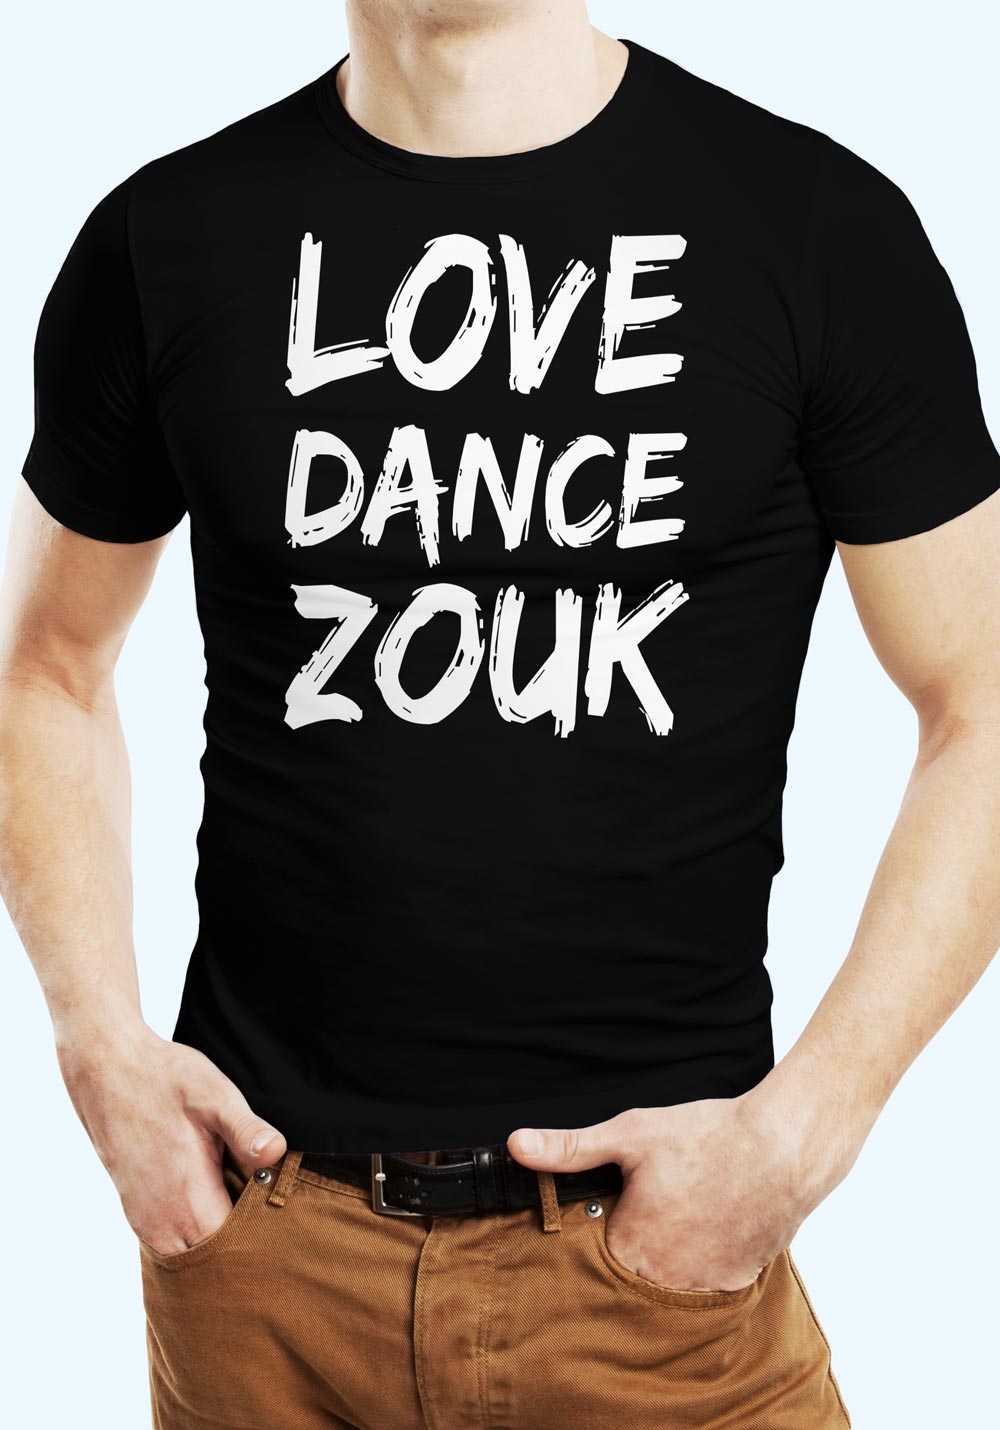 Man wearing Zouk T-shirt decorated with unique "Love Dance Zouk" design in black crew neck style